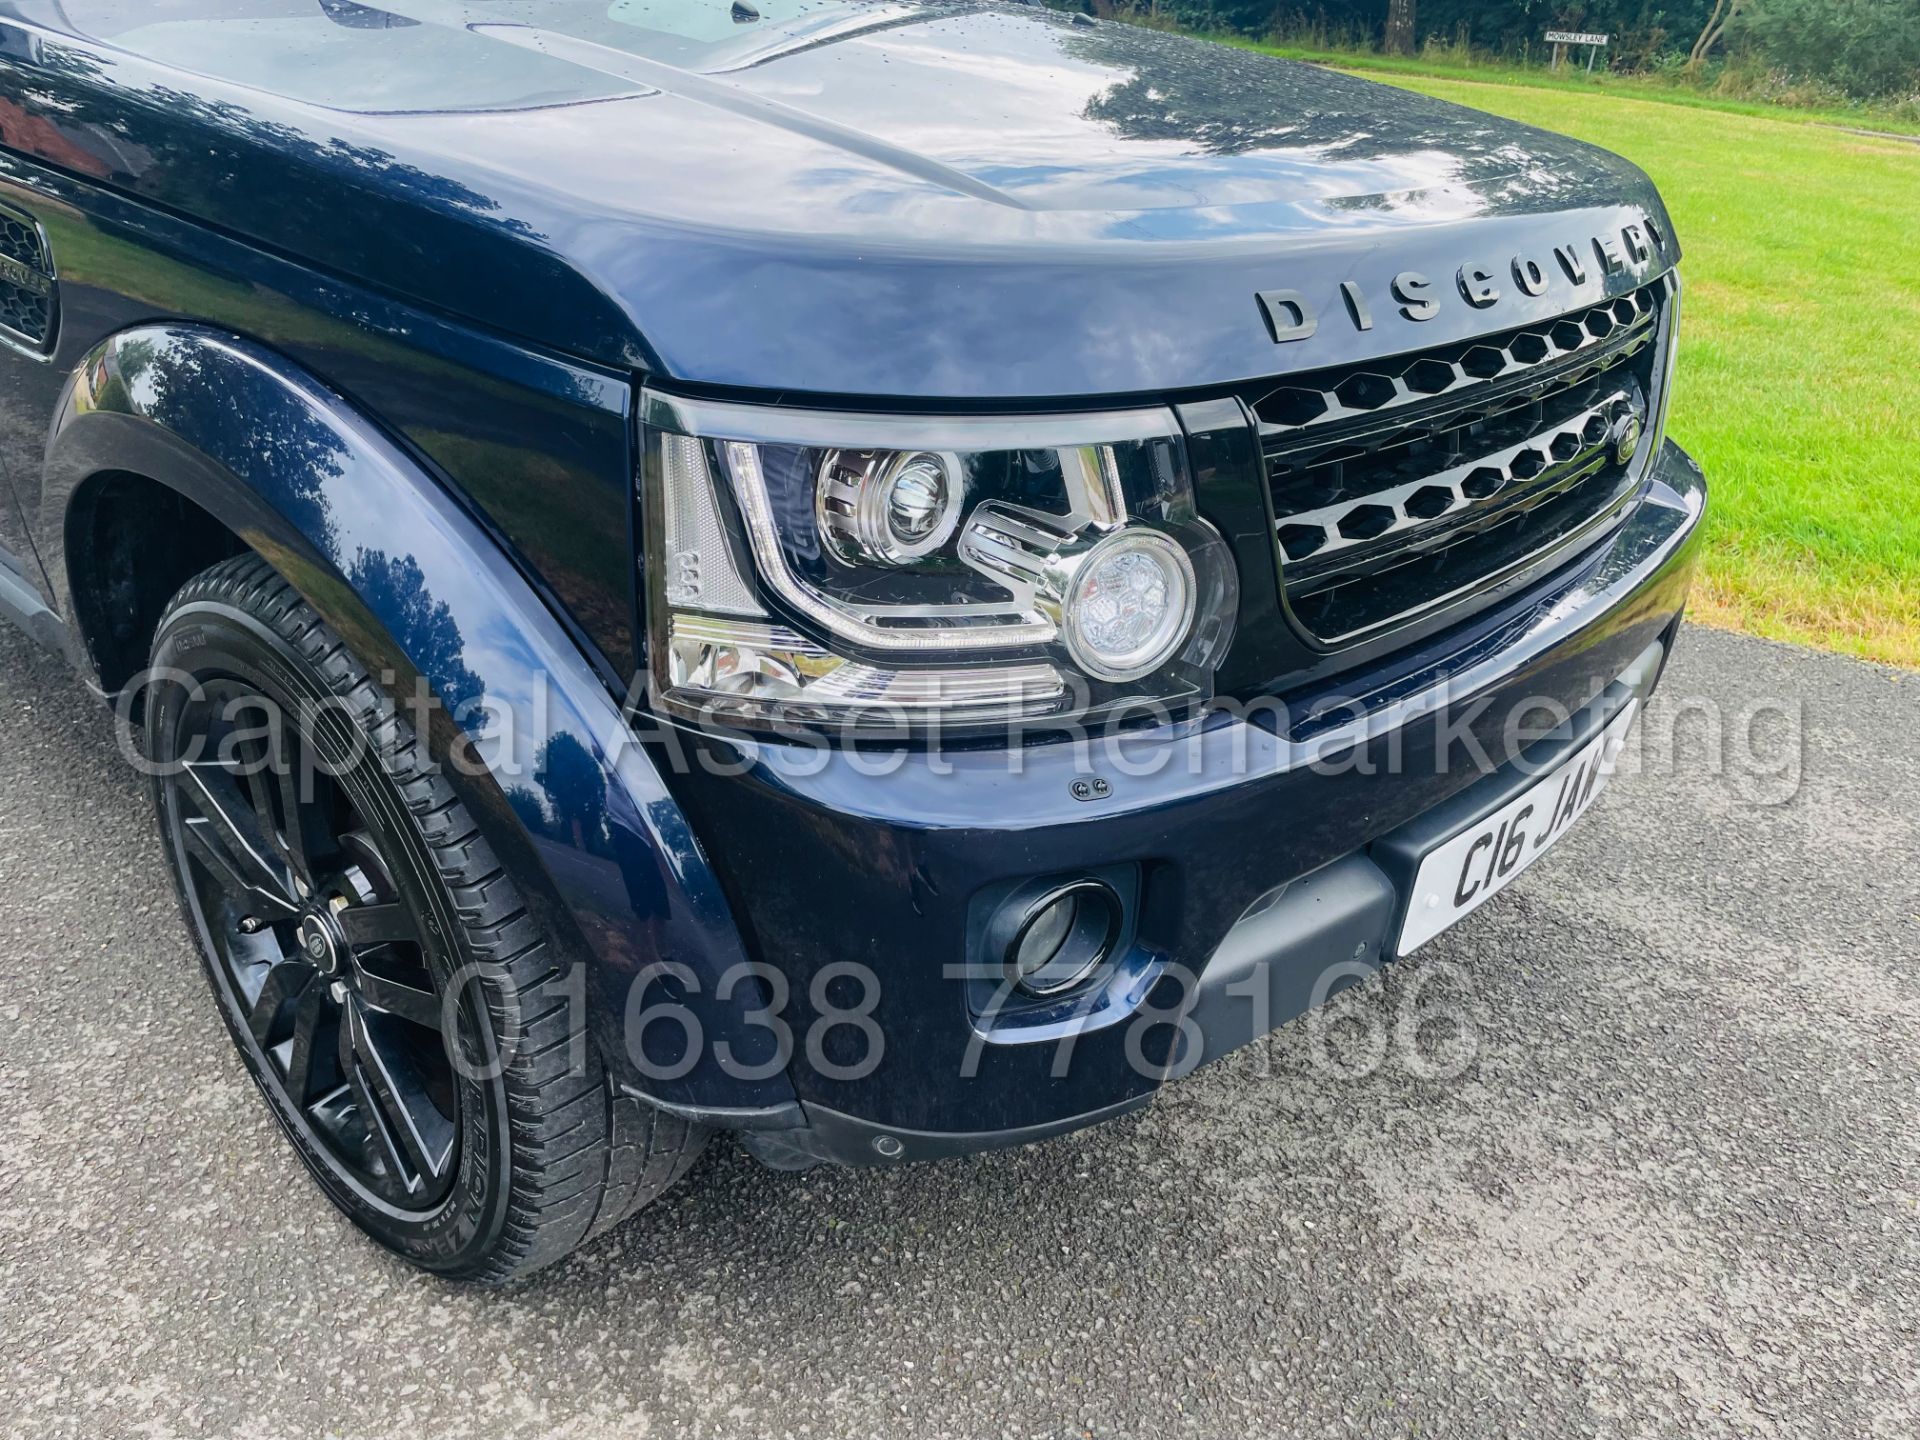 LAND ROVER DISCOVERY 4 *HSE* 7 SEATER SUV (2014 - NEW MODEL) '3.0 SDV6 - 255 BHP - 8 SPEED AUTO' - Image 15 of 61